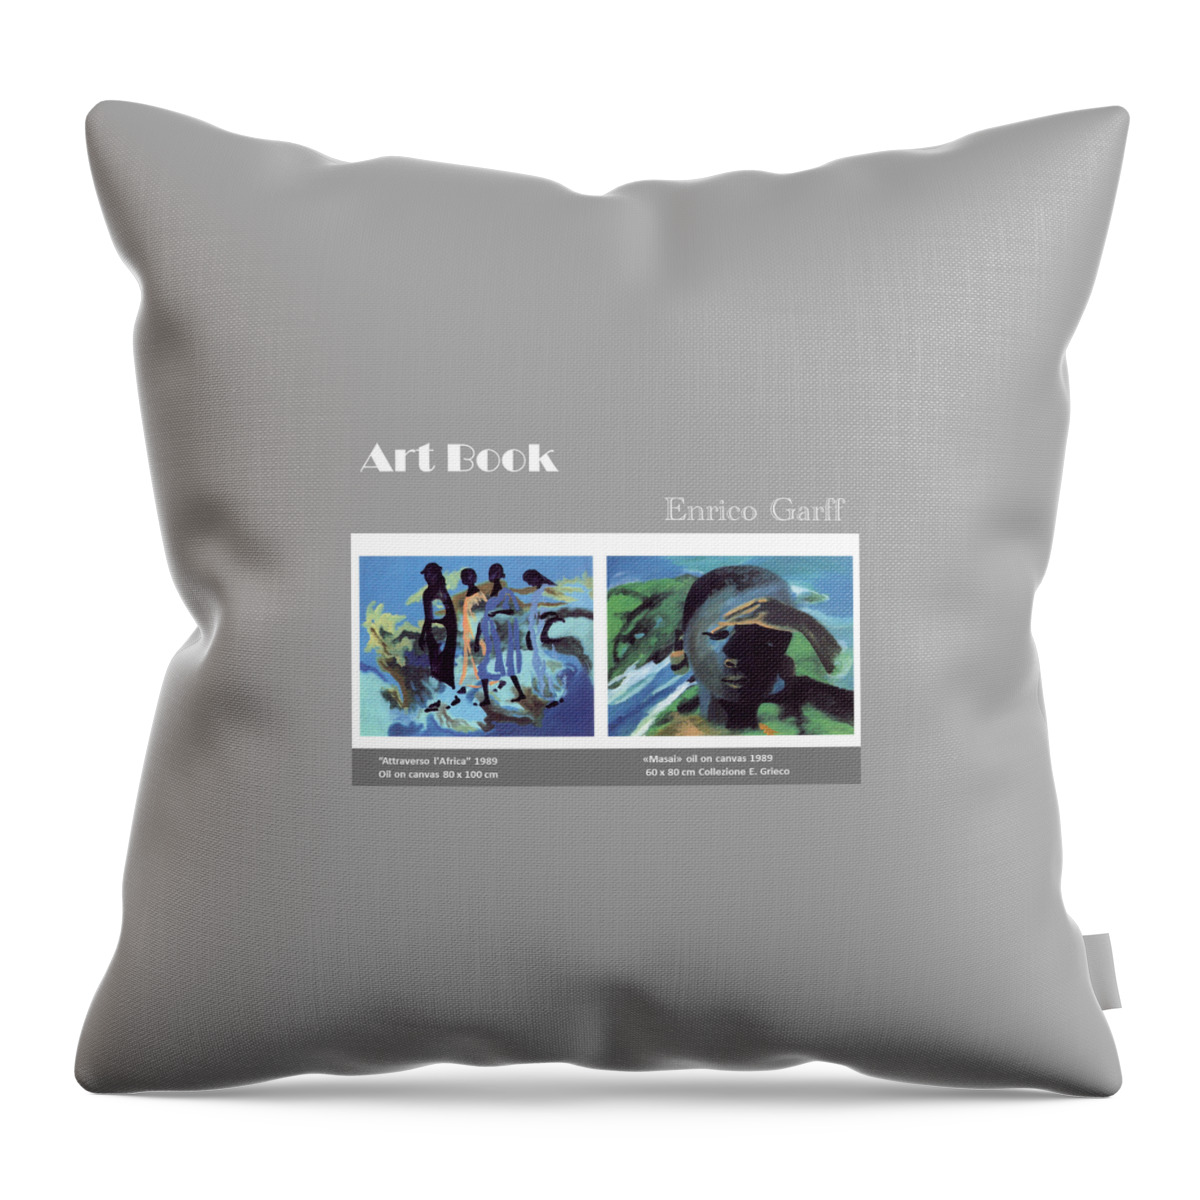 Africa Throw Pillow featuring the painting Art Book by Enrico Garff